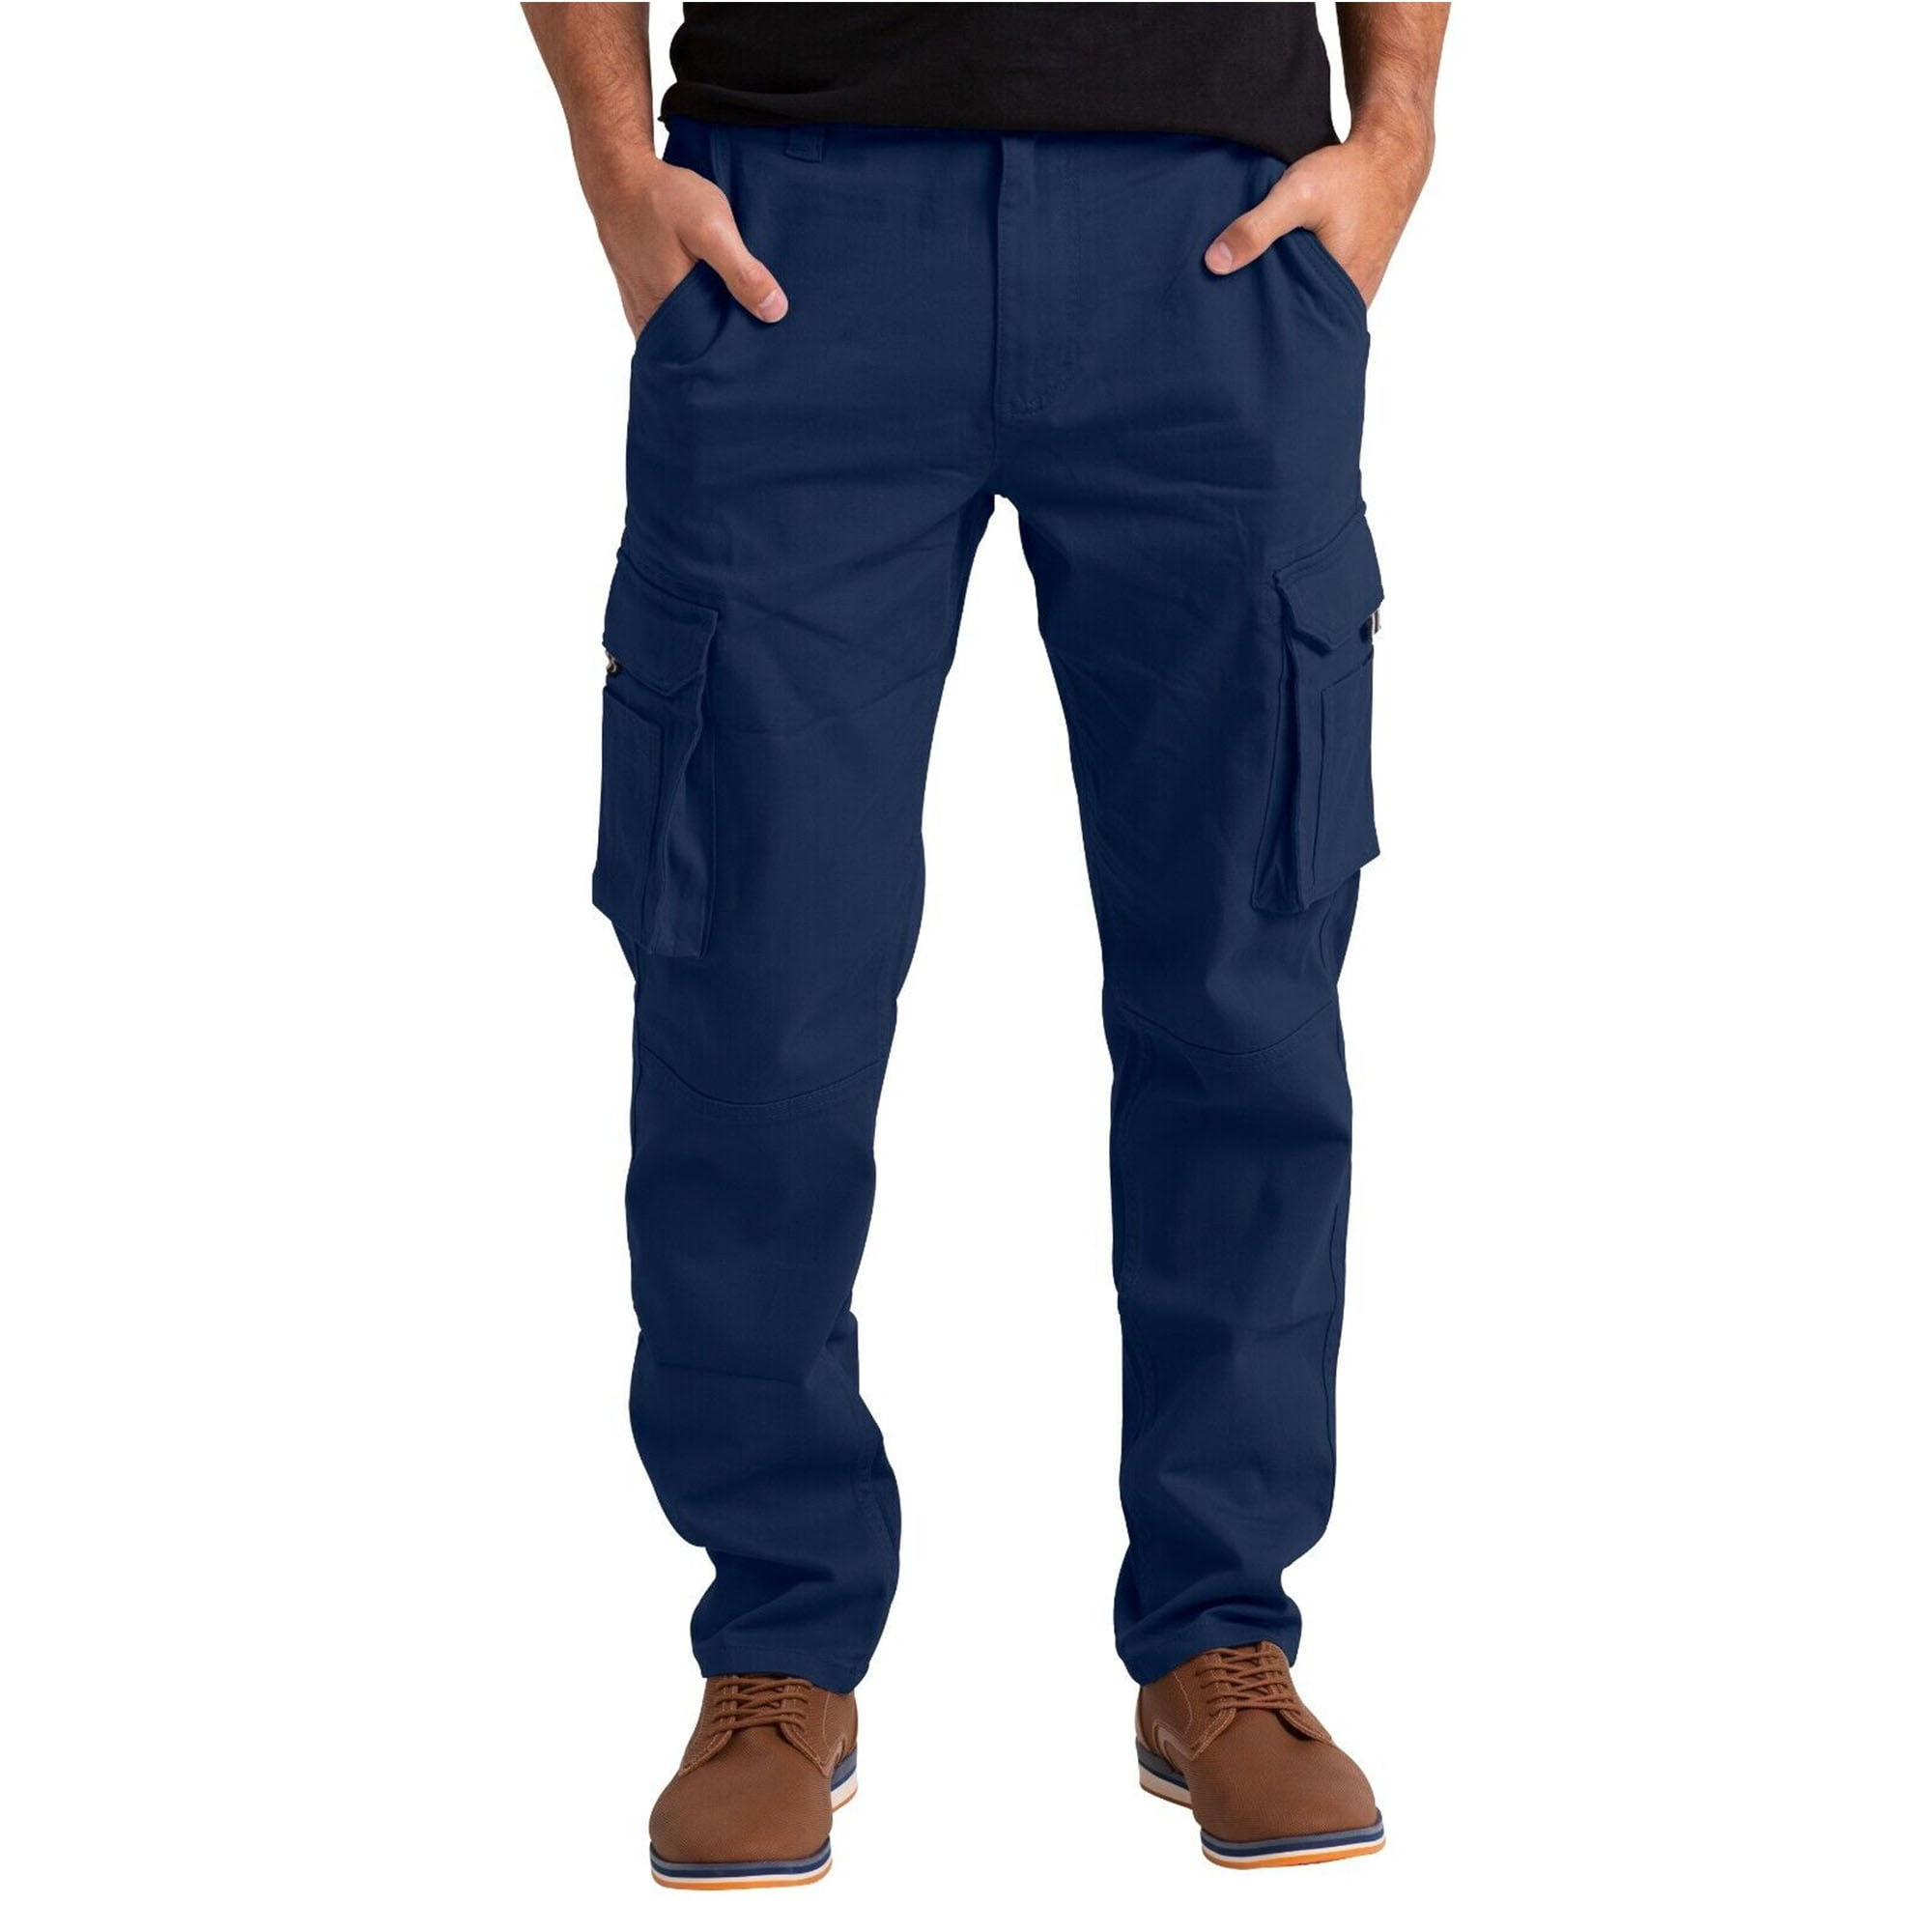 SHCKE Work Cargo Pants for Men Big and Tall Tactical Pants Heavy Duty ...